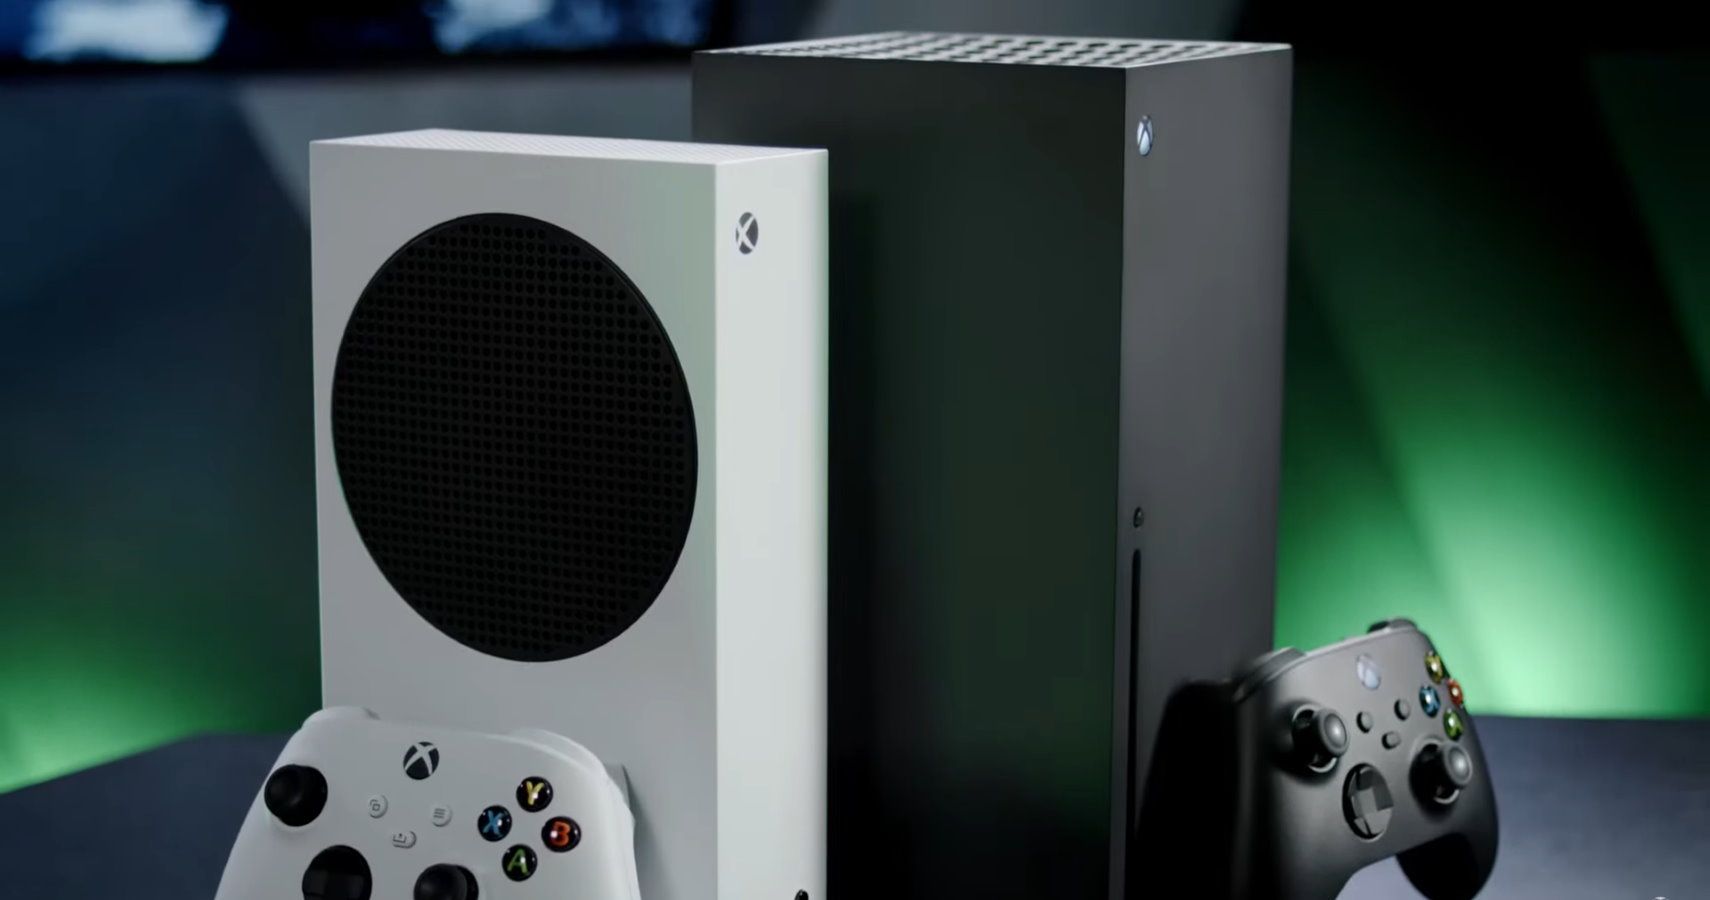 See The Xbox Series X/S In Action In Full Demo Walkthrough